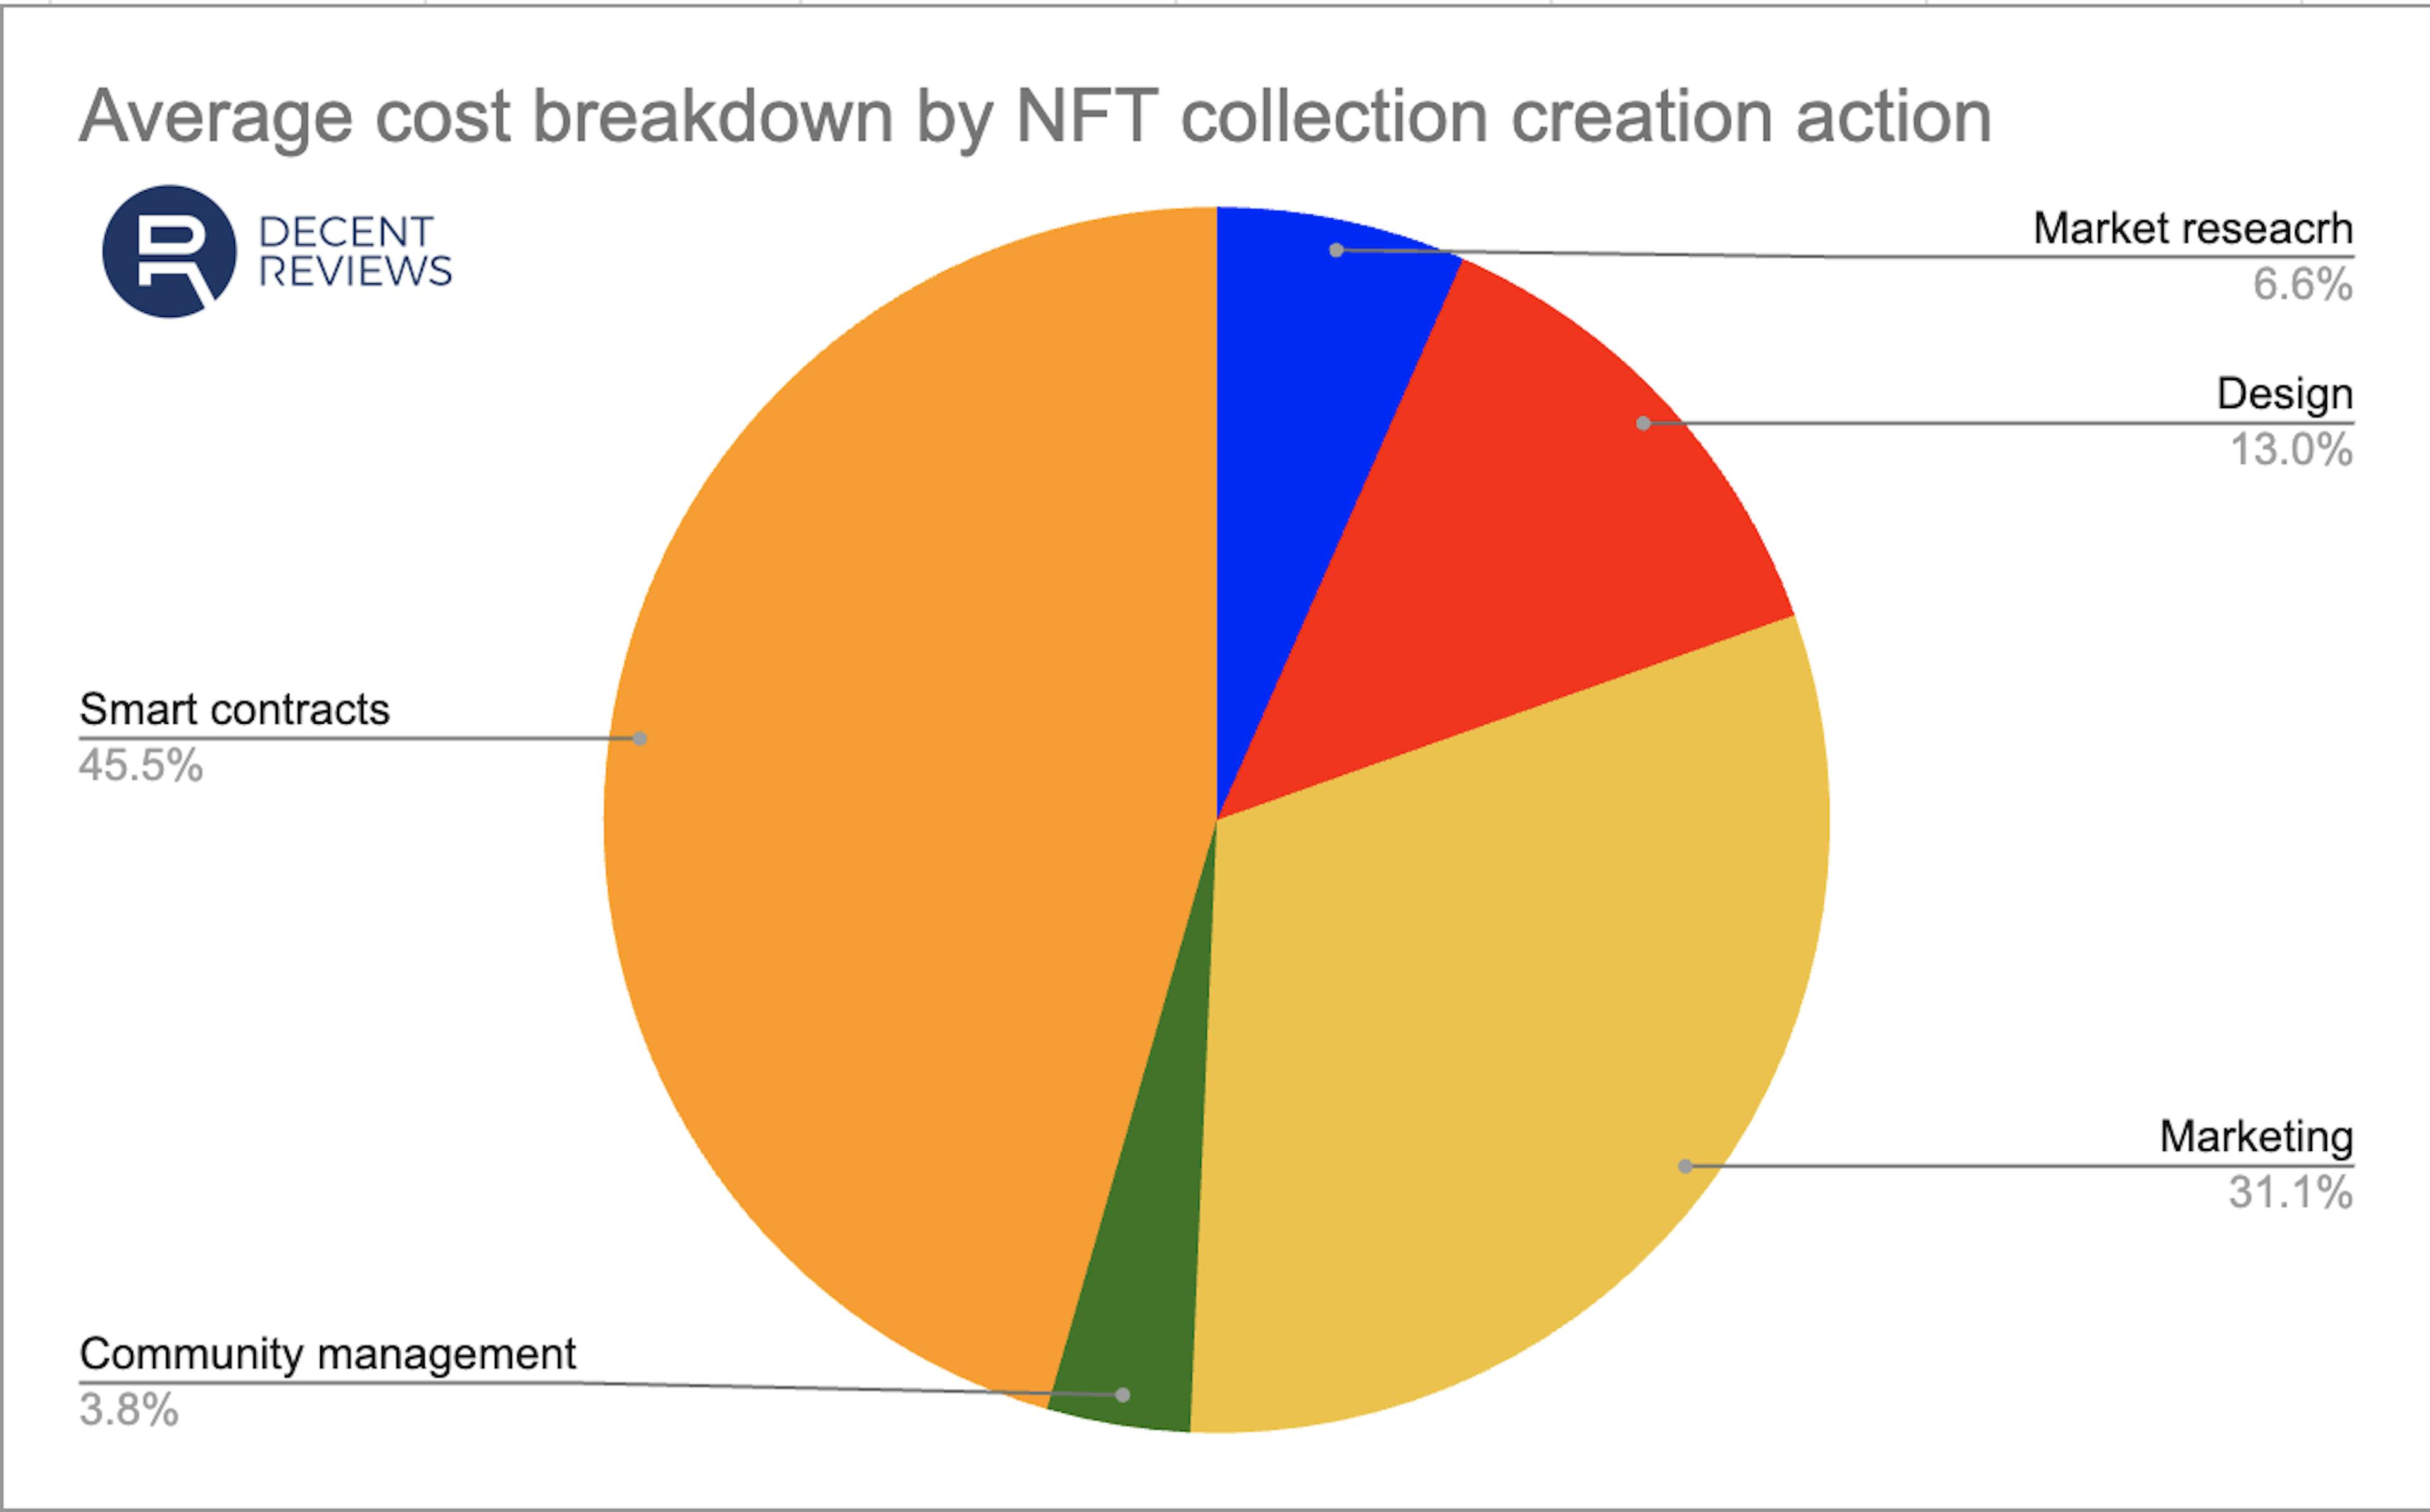 How the average NFT collection budget is spent